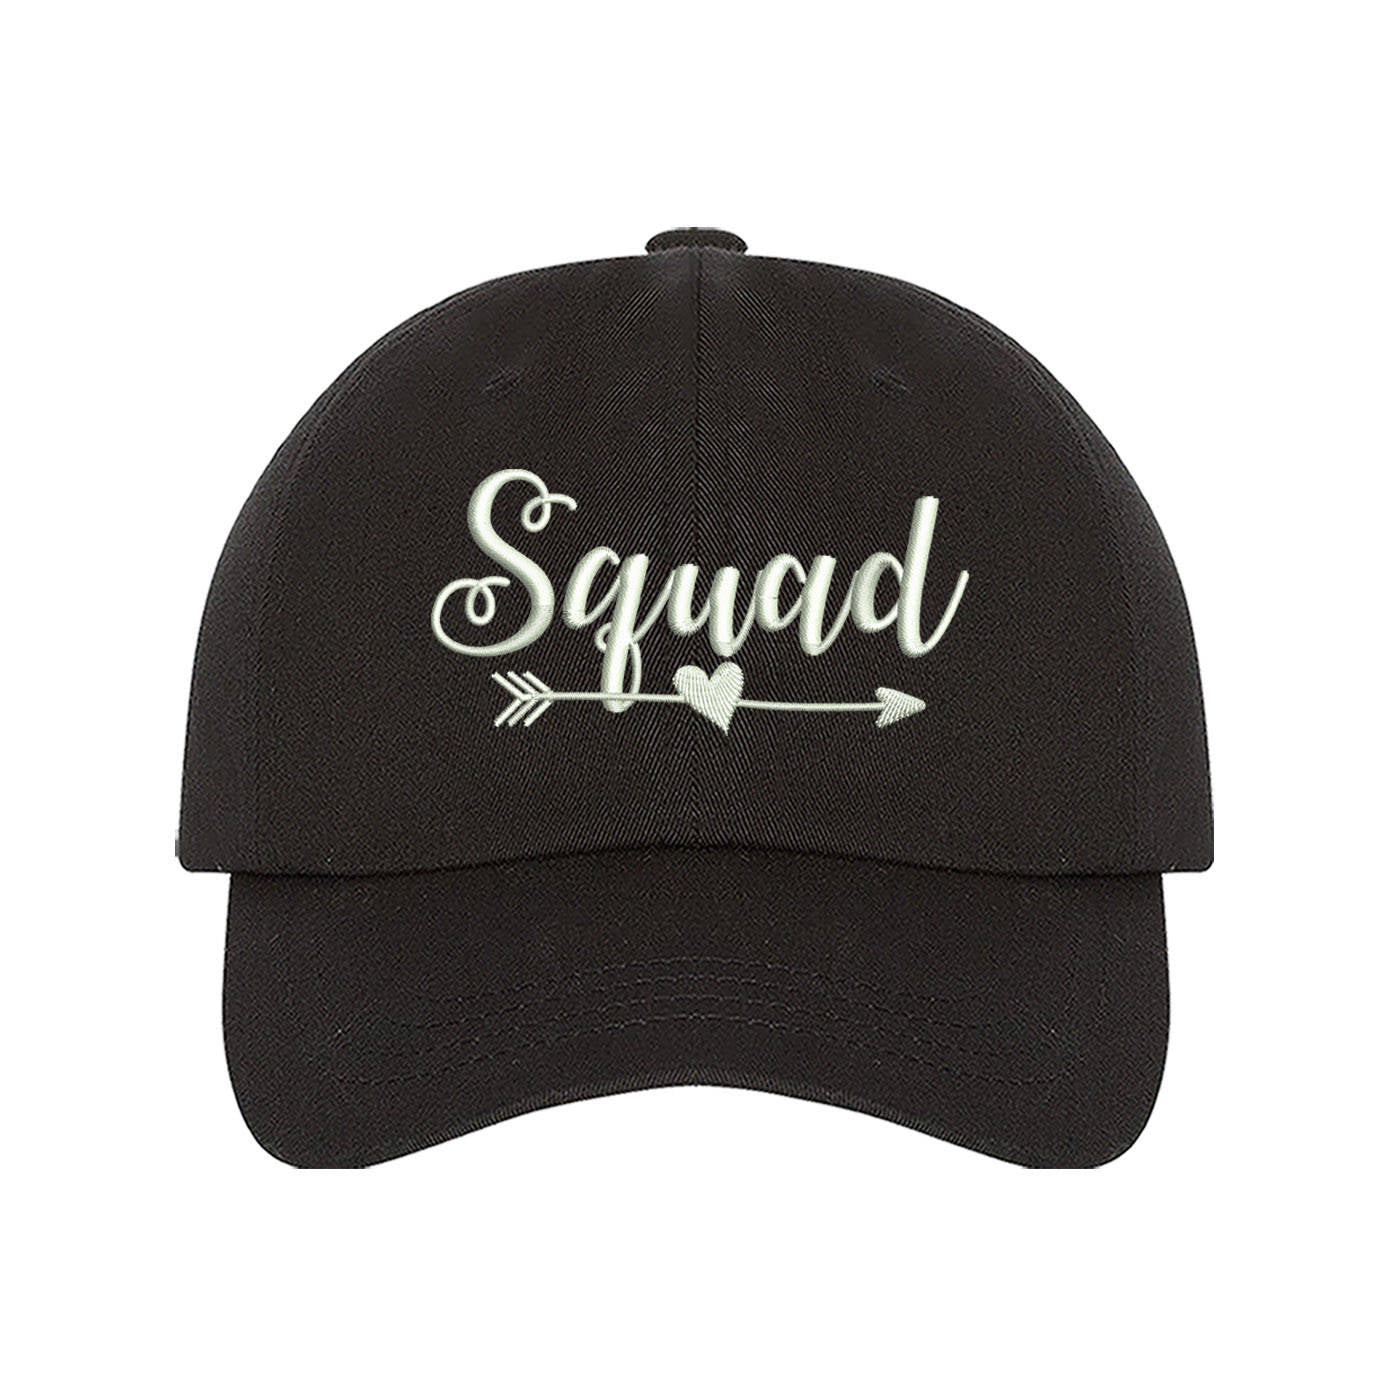 Bride and Squad Dad Hat Set, Embroidered Bride and Squad Dad Hats, Baseball Hat, Bridal Hats, Bride Hats, Bachelorette Hats, Embroidered Hat, Custom Embroidery, DSY Lifestyle Hat, Black Dad Hat, Made in LA 